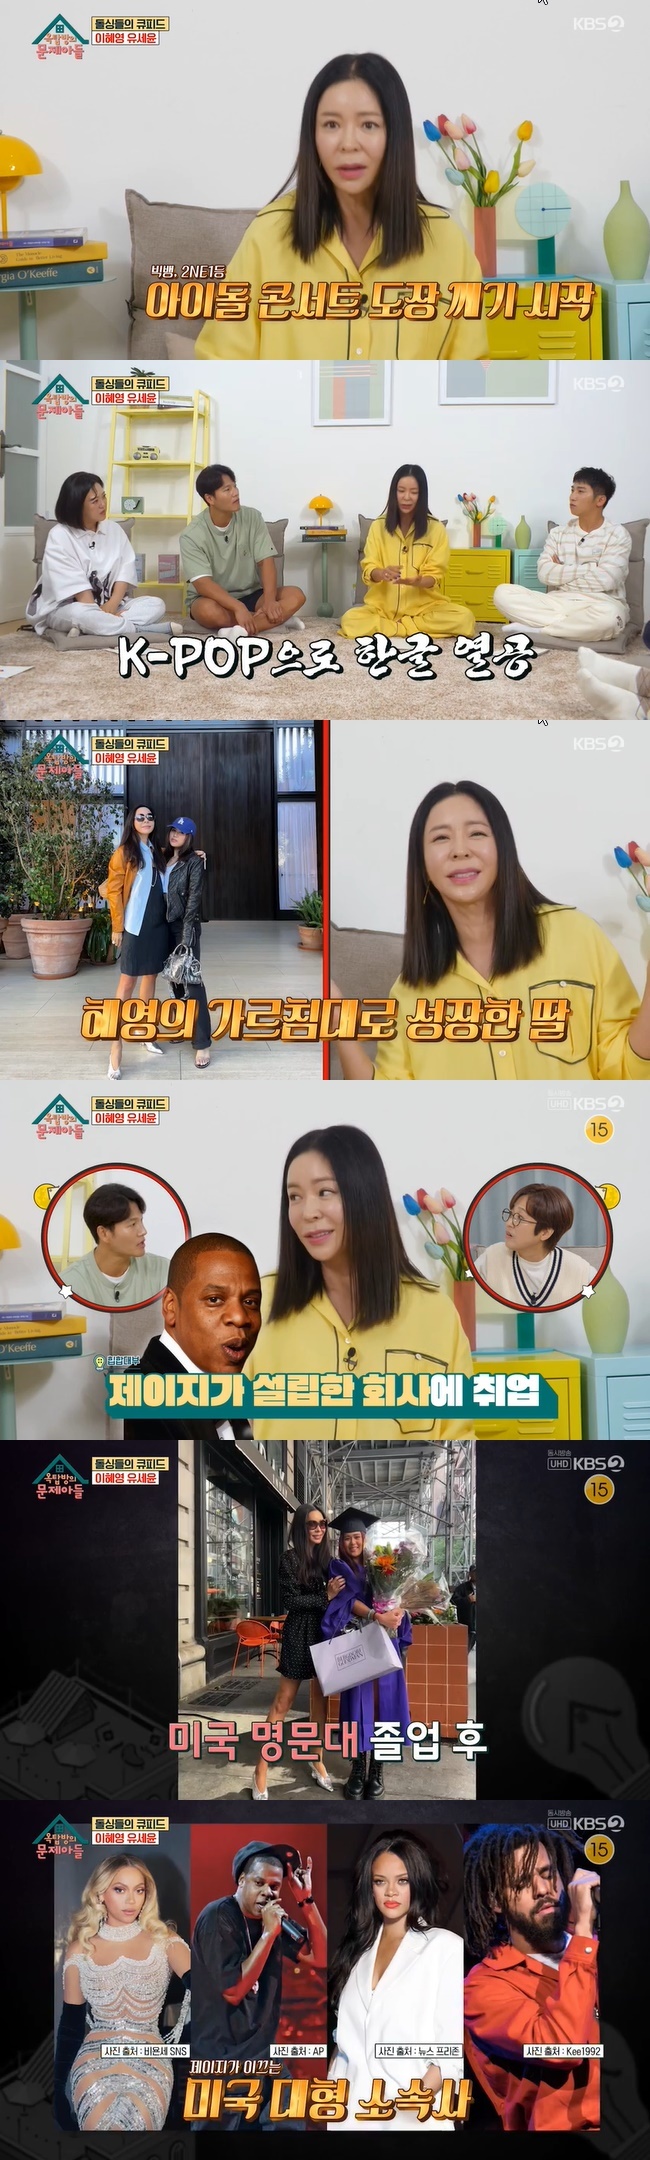 Lee Hye-yeong said that her daughter, who was acquired by Remarriage, is currently working for Jay Jis agency.On July 5, KBS 2TV  ⁇  Problem Child in House  ⁇  Lee Hye-yeong told her daughters recent news.Lee Hye-yeong, who was born in 1999, said she met her daughter when she was 10 or 11 years old. She was in puberty.When Kim Sook asked if it was possible to talk, Lee Hye-yeong liked me so much.If you do not get up when you get up or get up, you will not talk to me for a week if you do this one more time. I got up because I was scared.  ⁇  At first, I was a little timid and I was playing alone at school.At the end of the day, there was a Disco party event, so I dressed it up nicely for the event. I came home too early and did not have a Disco party? I did not answer it. I could not dance at all and I did not know K-pop at all.From then on, I started to go to concerts together. Lee Hye-yeongs daughter, who went to various concerts, fell in love with the big bang concert and tried to write the lyrics in Korean and analyze the meaning.Lee Hye-yeong thought that mathematics and English were not important, so she contacted the choreographers and taught them eight hours of dancing every weekend, because she knew how to enjoy it.I went to Sams Club and played, and my dad went and paid for the drink. He made me a child who enjoyed it and danced well.About her daughters recent situation, Lee Hye-yeong said, I entered a company founded by The Graduate and Jay Ji at the university. It was only a few months ago.I was working on marketing. I was a company girl on SNS at first. I always wanted to work because Sams Club photo came out, but that was my childs job. At that time, I thought I taught dancing well.